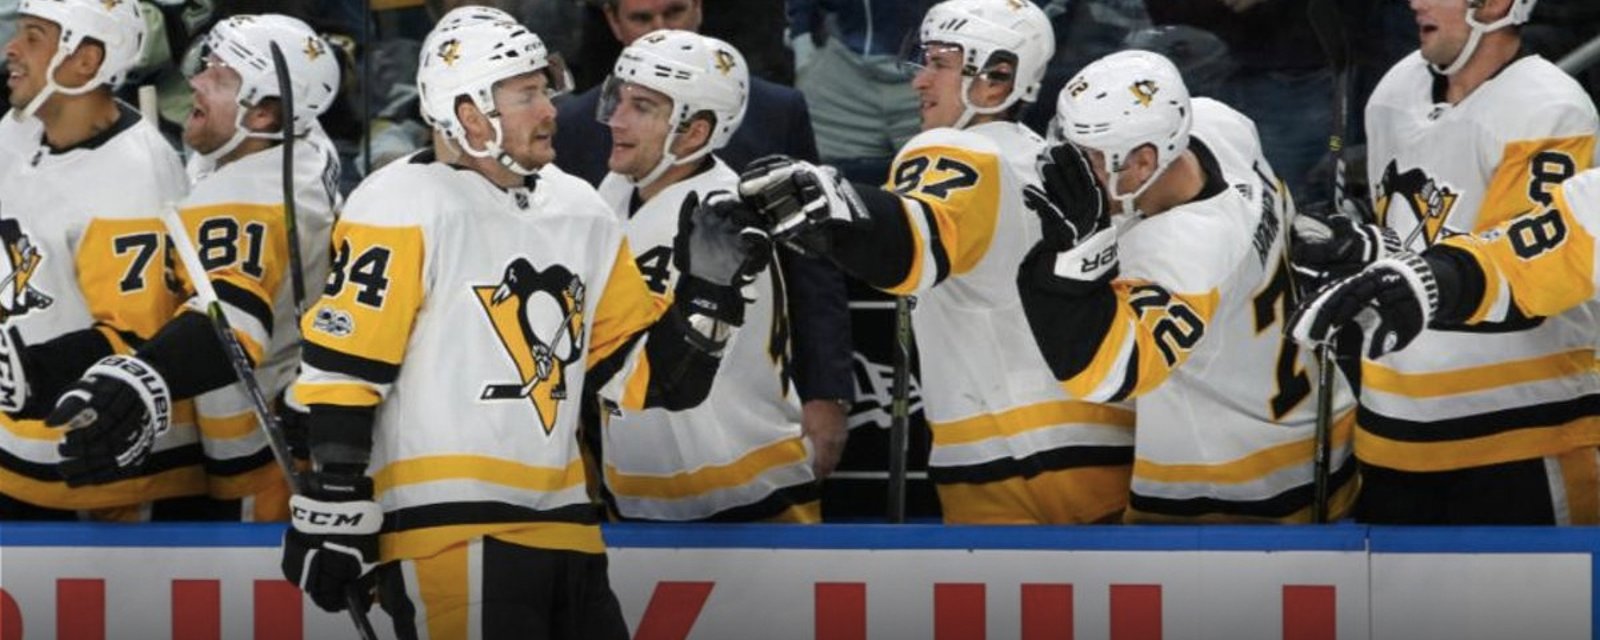 Report: 4 players missing from Pens' practice